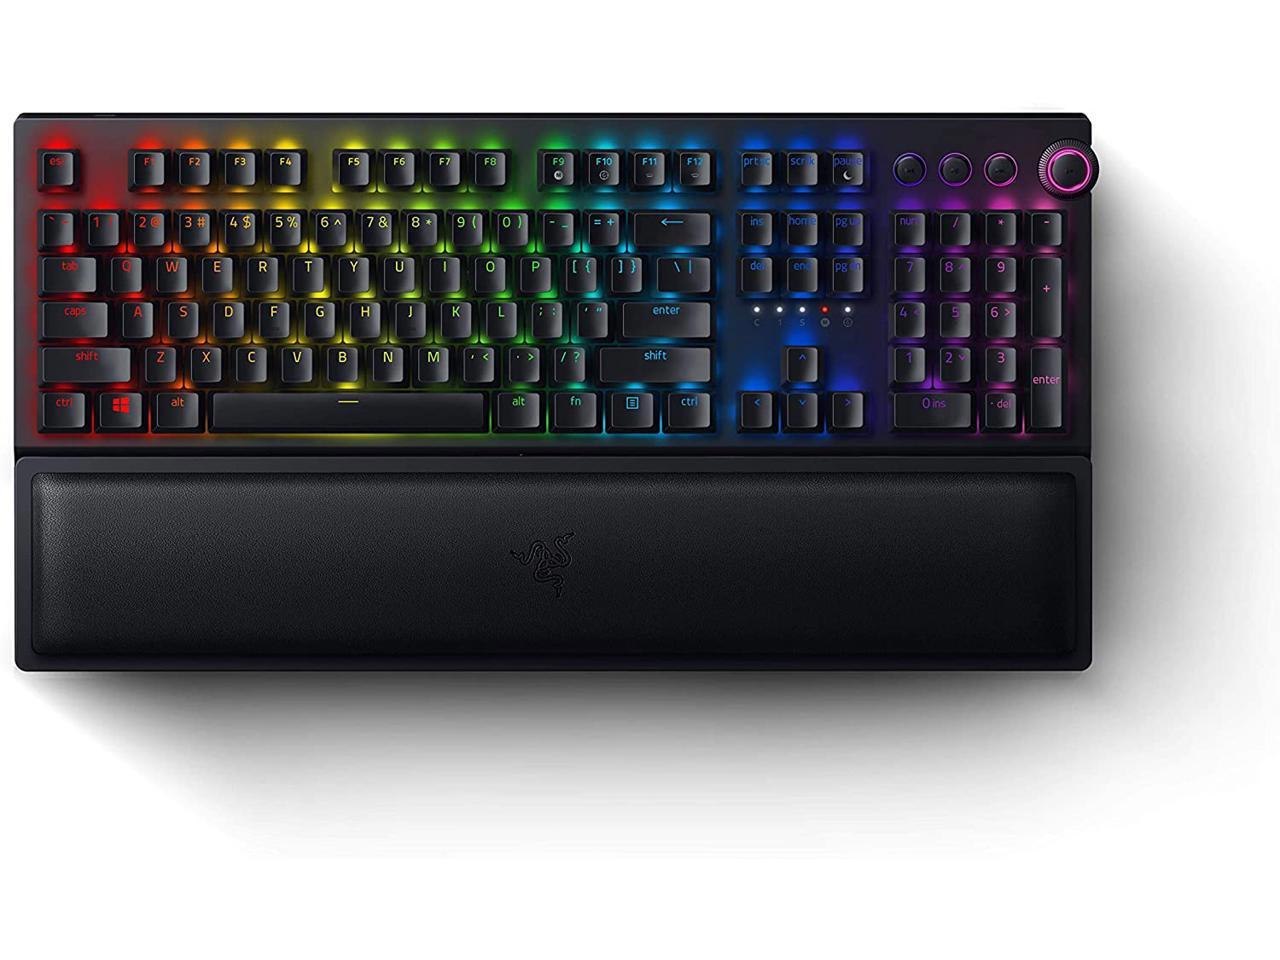 Razer BlackWidow V3 Pro Mechanical Wireless Gaming Keyboard: Green Mechanical Switches - Tactile & Clicky - Chroma RGB Lighting - Doubleshot Abs Keycaps - Transparent Switch Housing - Bluetooth/2.4GHz